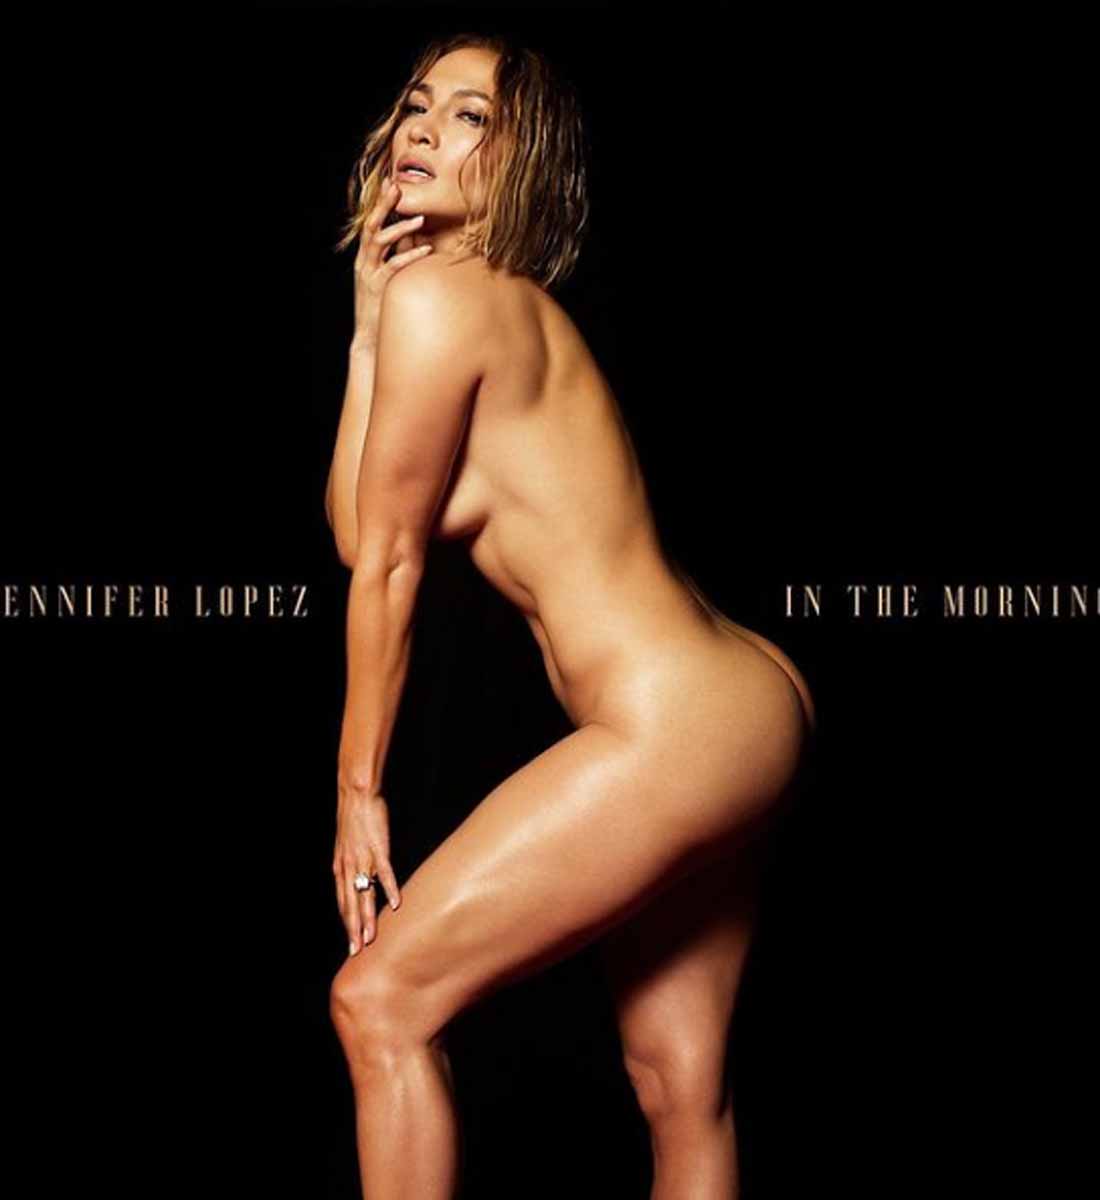 Finally, Jennifer Lopez is a woman and a body - Naked for her new single 300